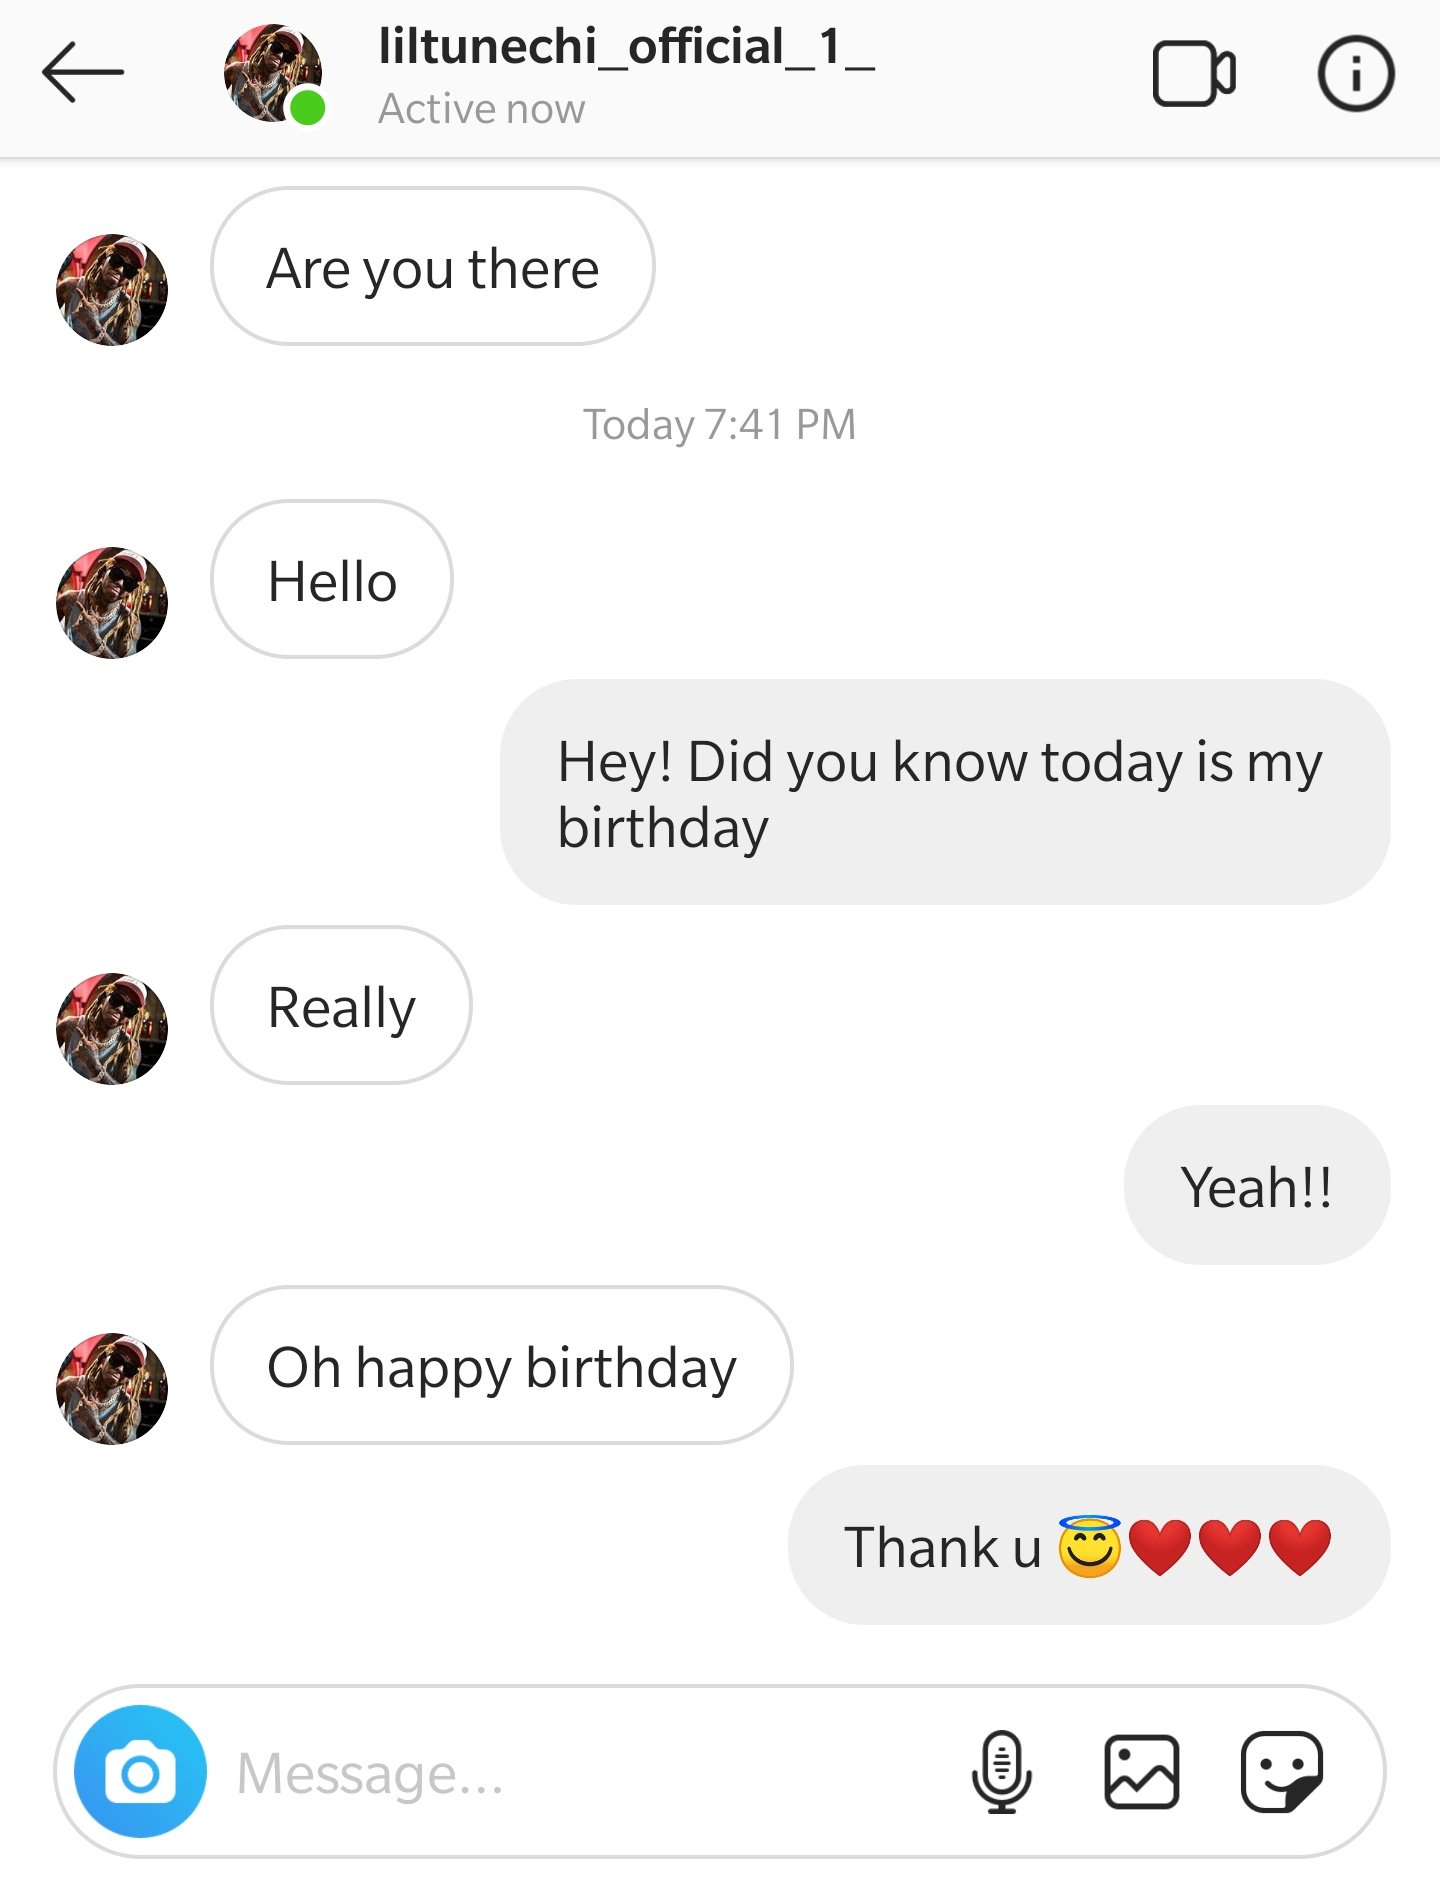 Can you guys believe my Lil Wayne Fan Account reply guy wished me a happy birthday!! 